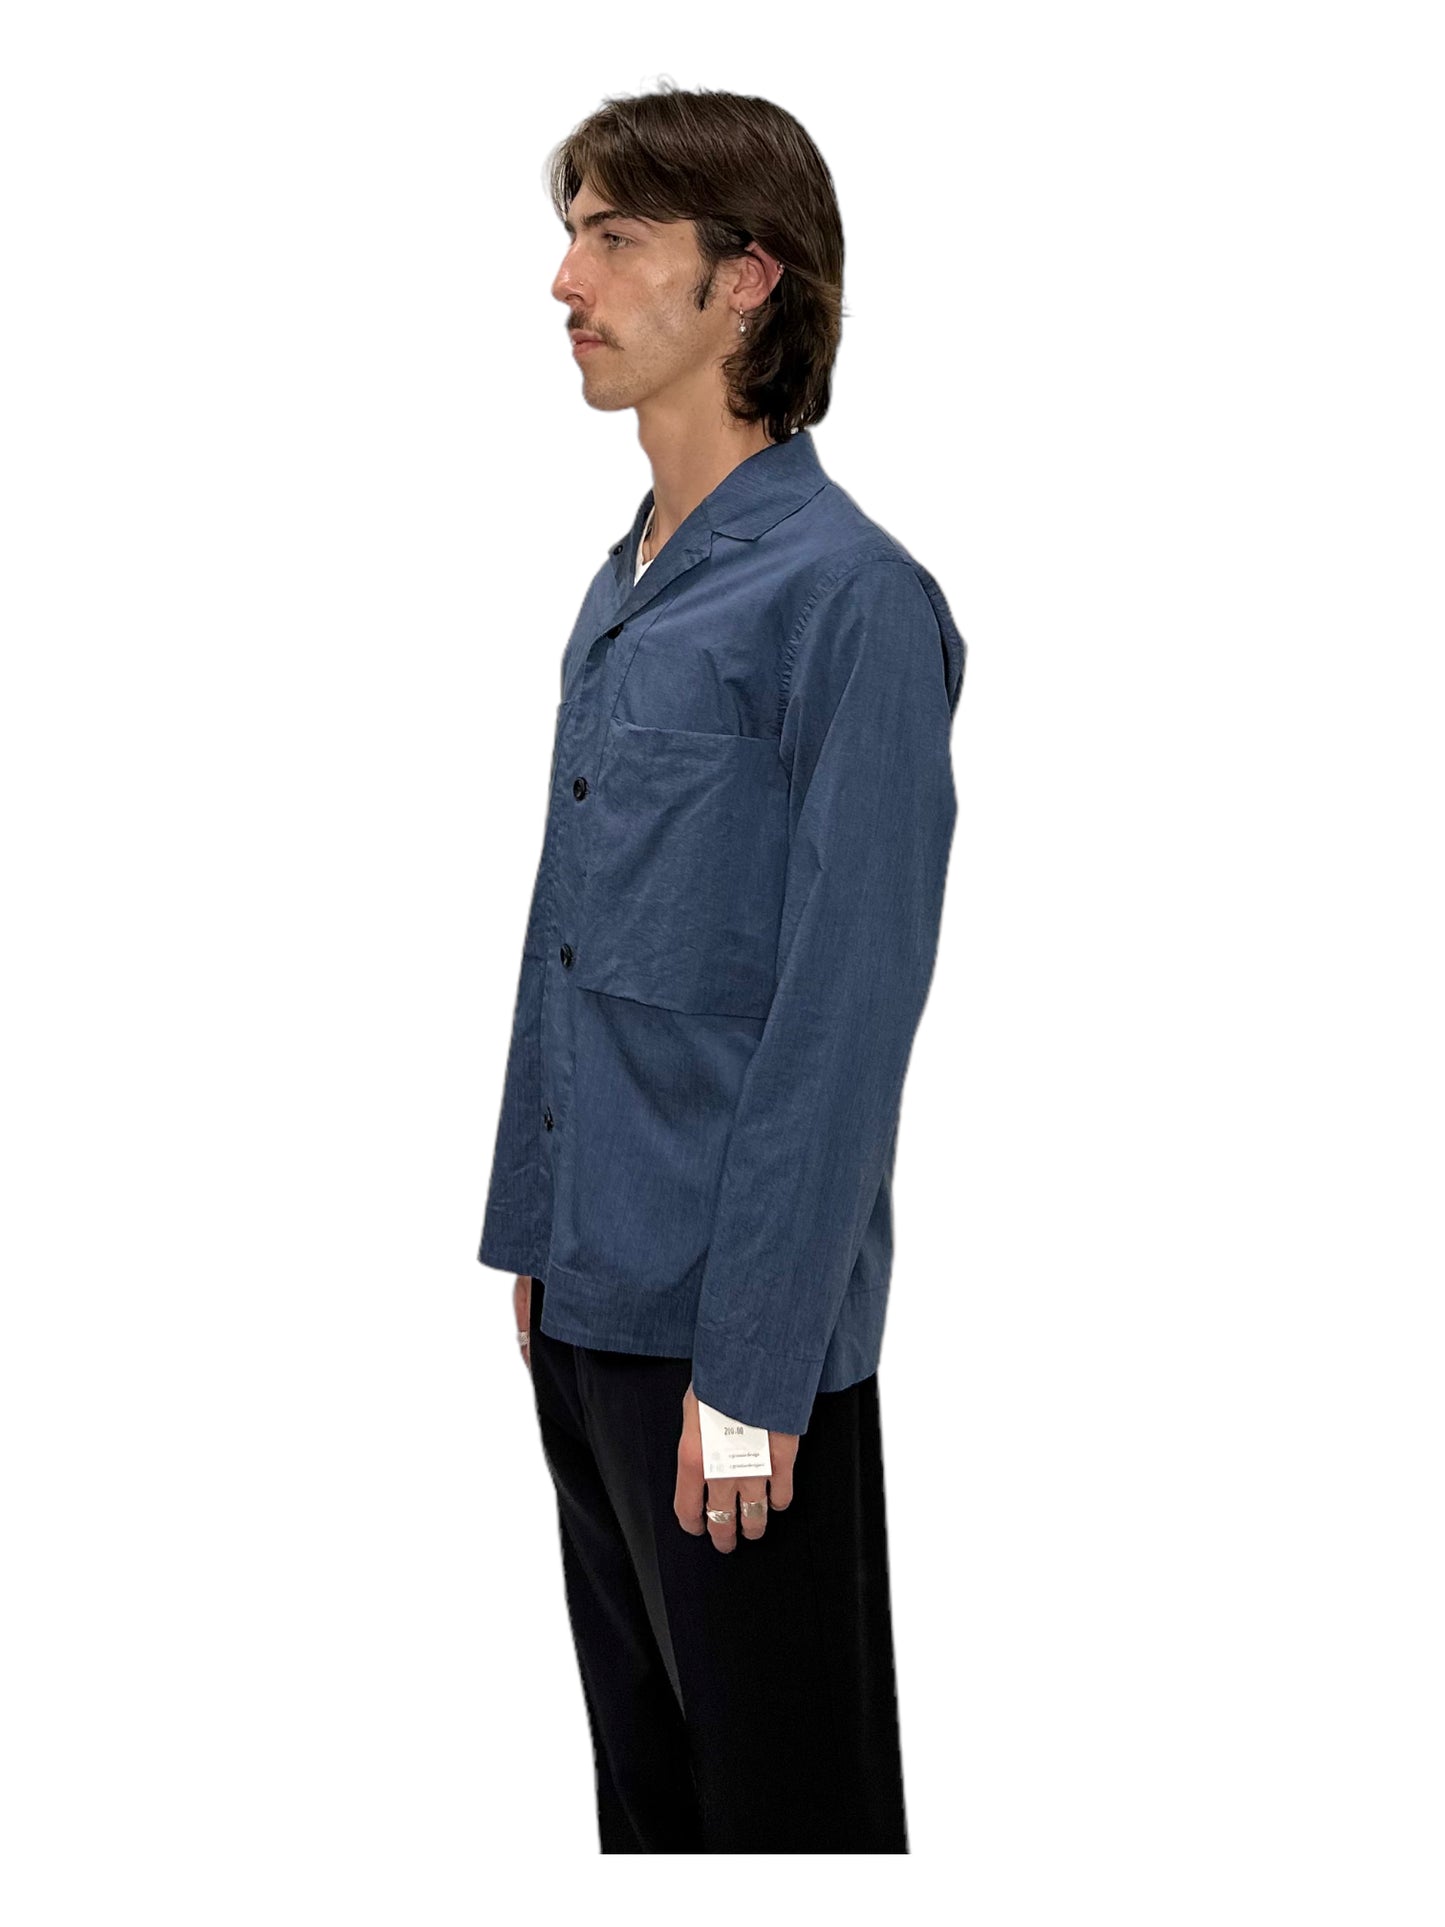 Still By Hand Blue Melange Shirt Jacket - Genuine Design Luxury Consignment for Men. New & Pre-Owned Clothing, Shoes, & Accessories. Calgary, Canada